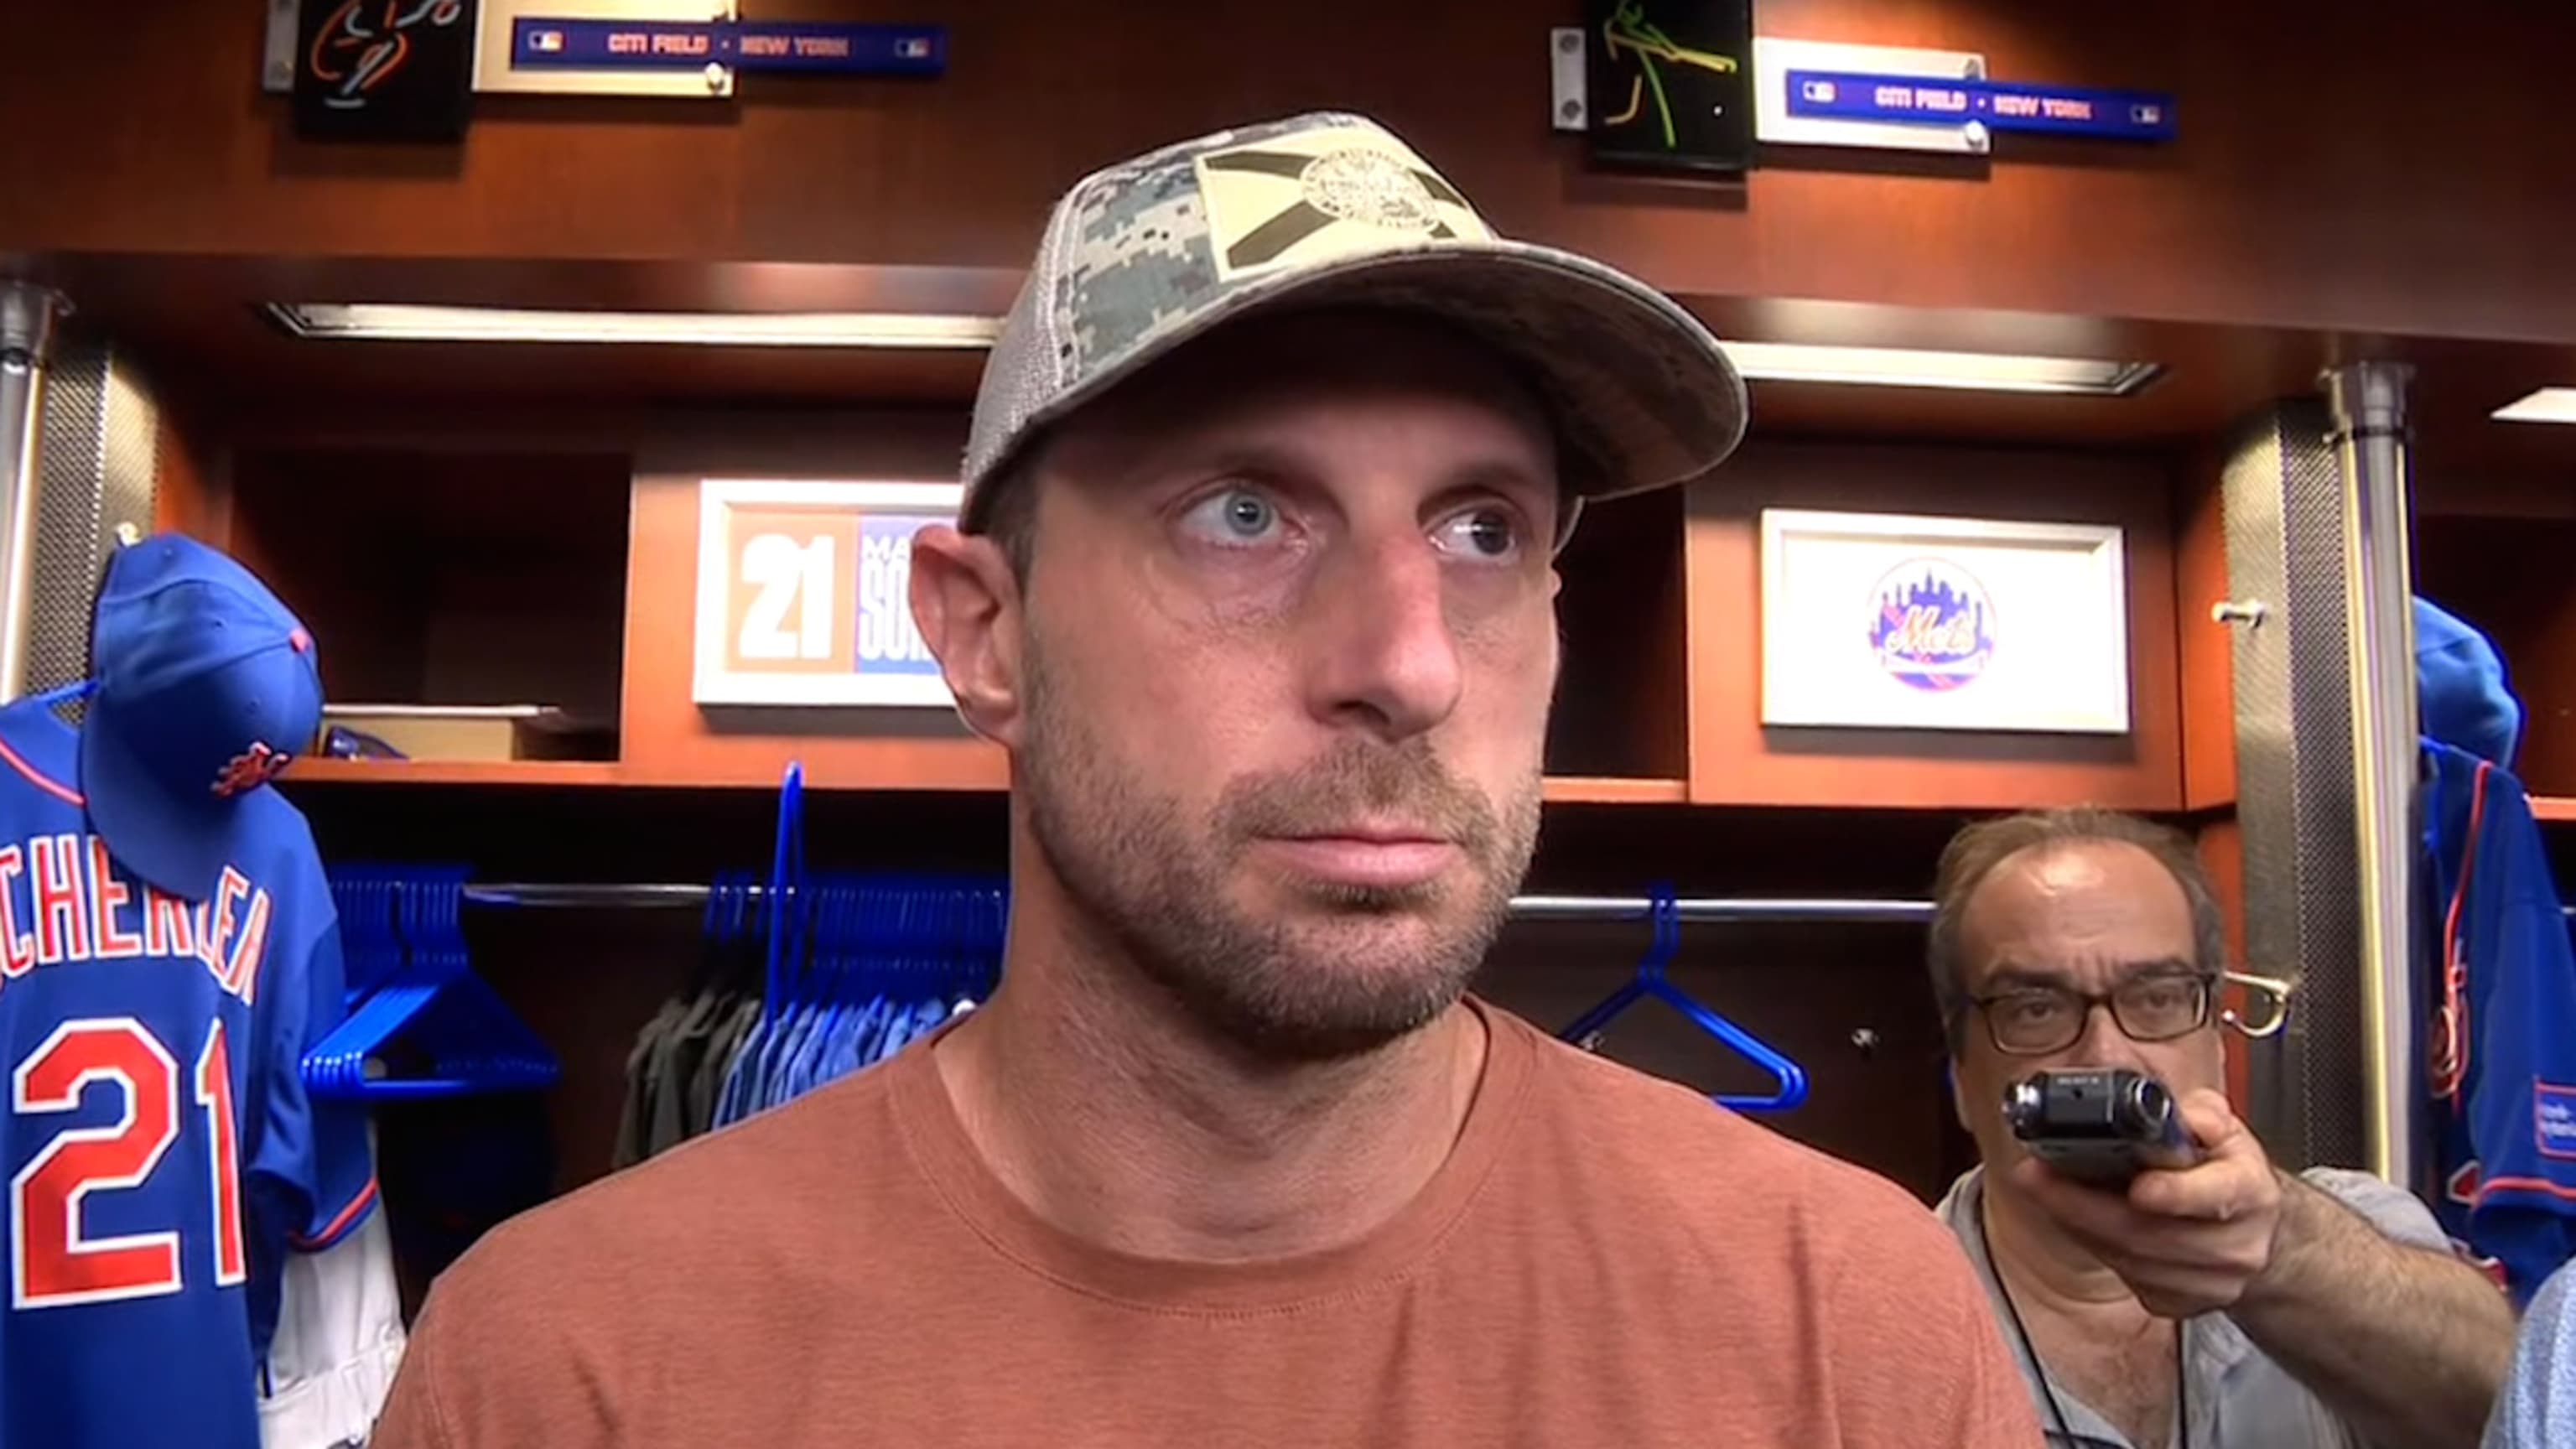 The Mets Couldn't Trade Max Scherzer if They Wanted To